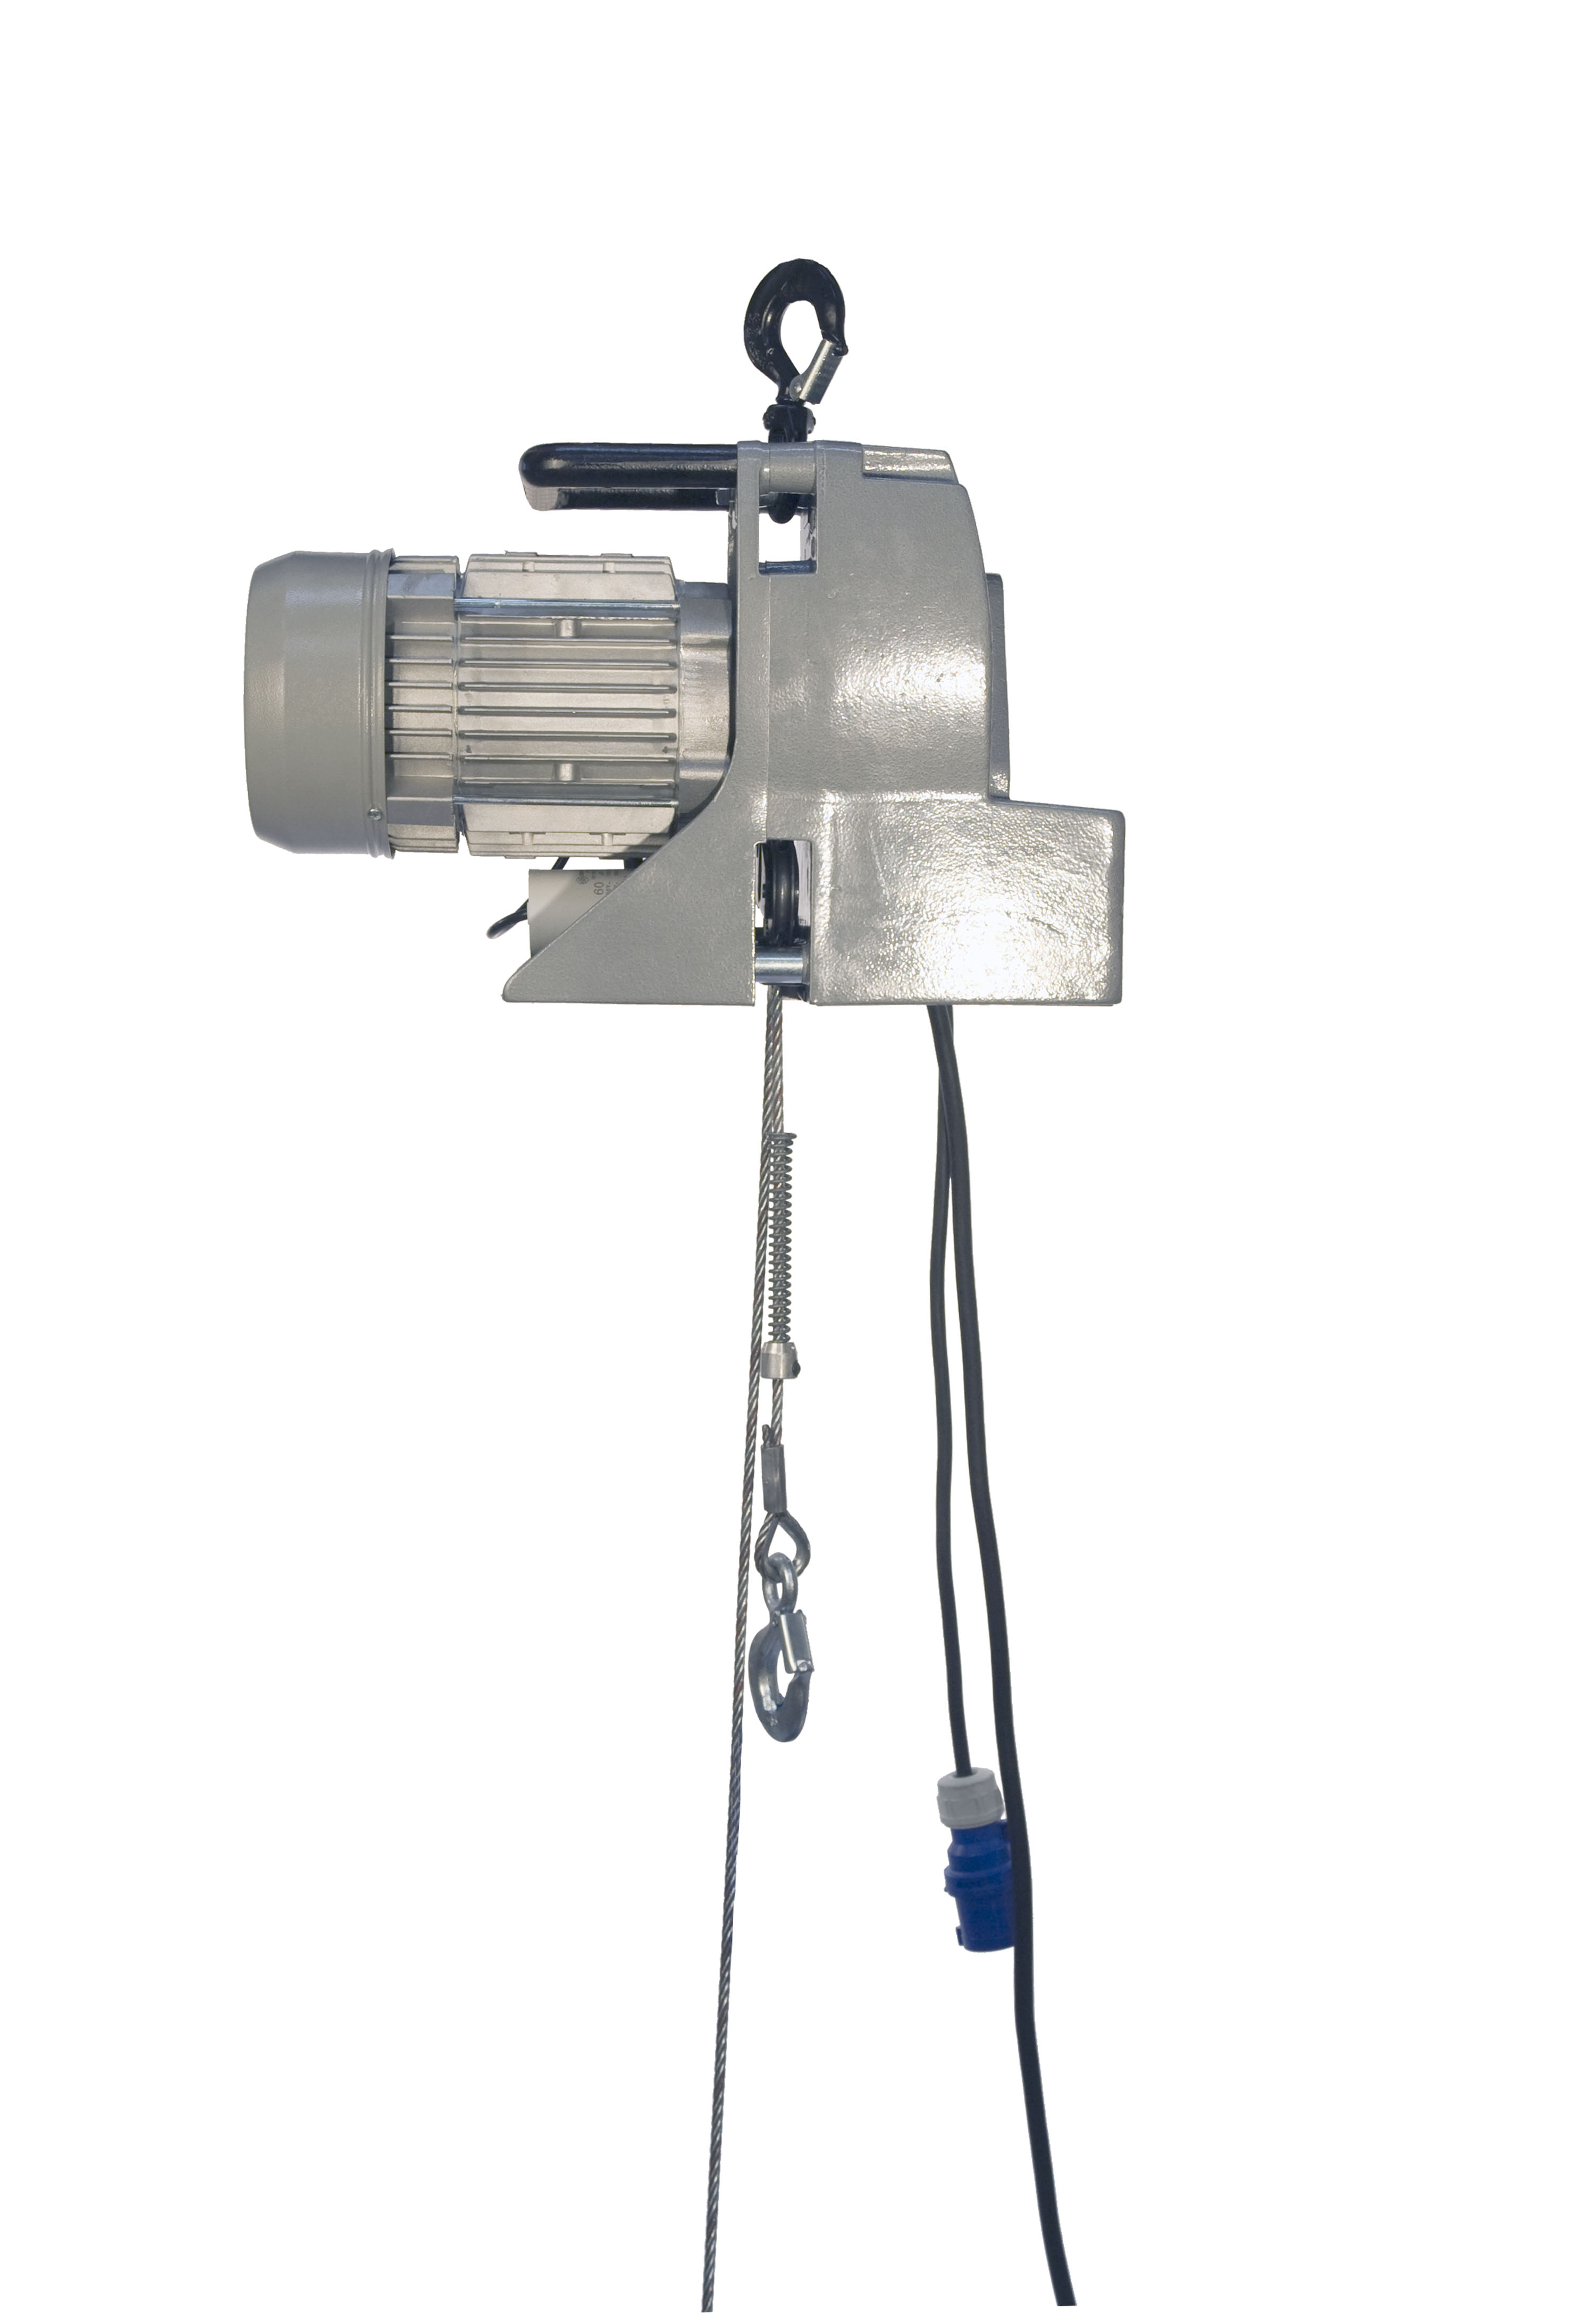 Minifor TR50 Hoist for hire or for sale